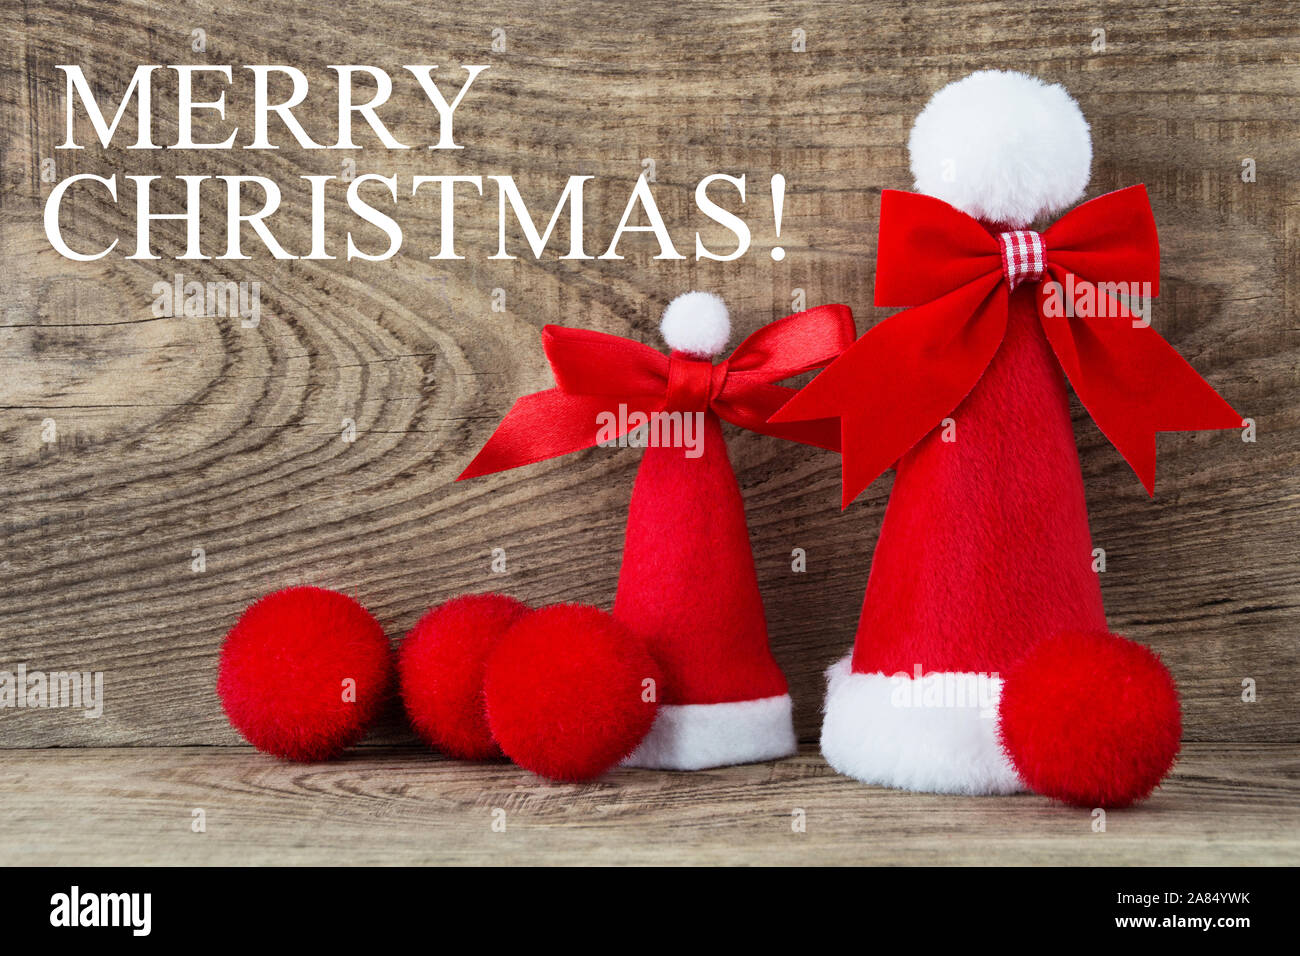 Merry Christmas and decoration Stock Photo